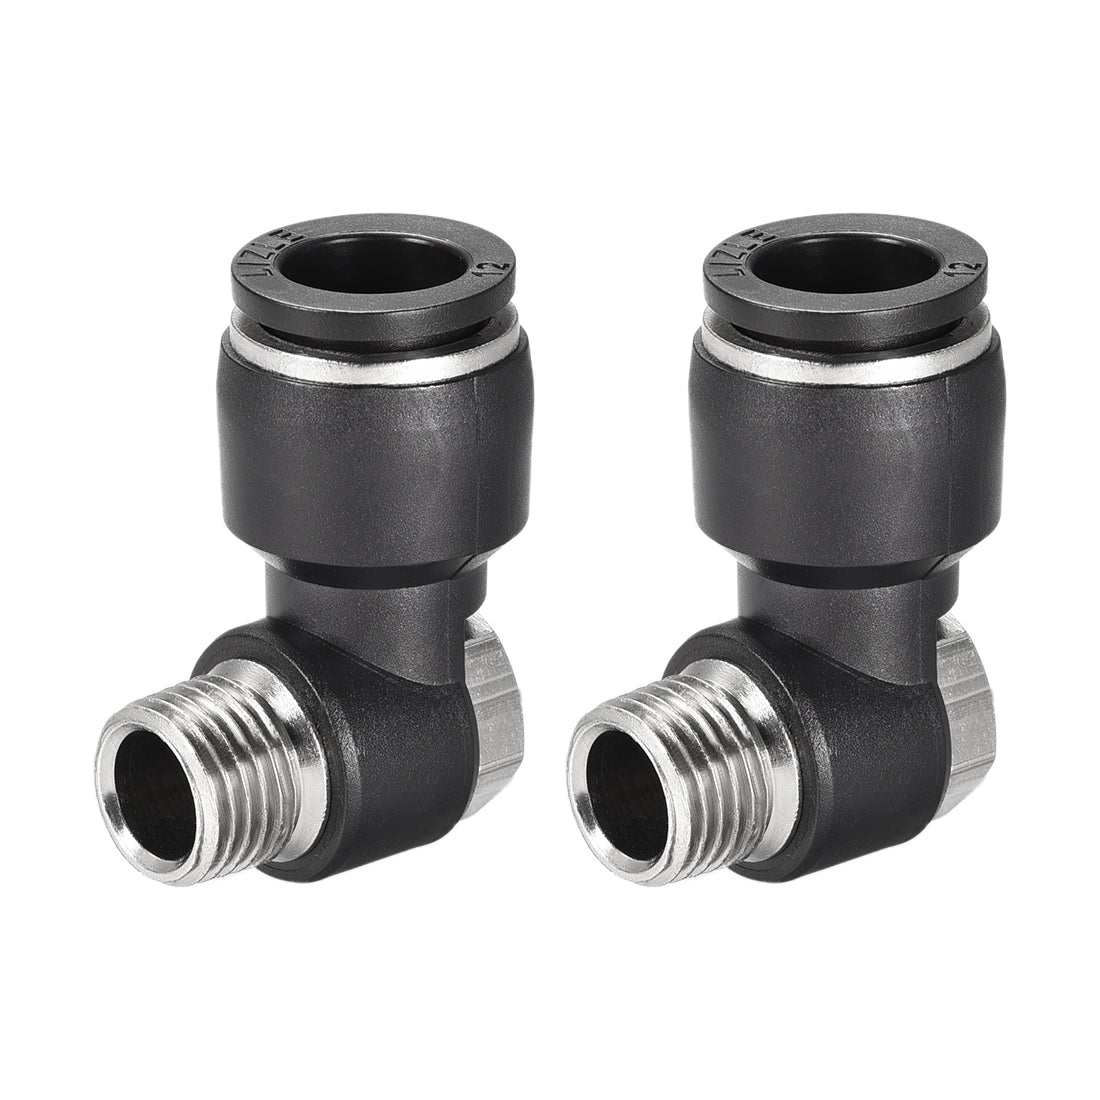 Uxcell Uxcell Pneumatic Push to Connect Tube Fitting 10mm Tube to 1/4PT Male Thread Elbow 2Pcs